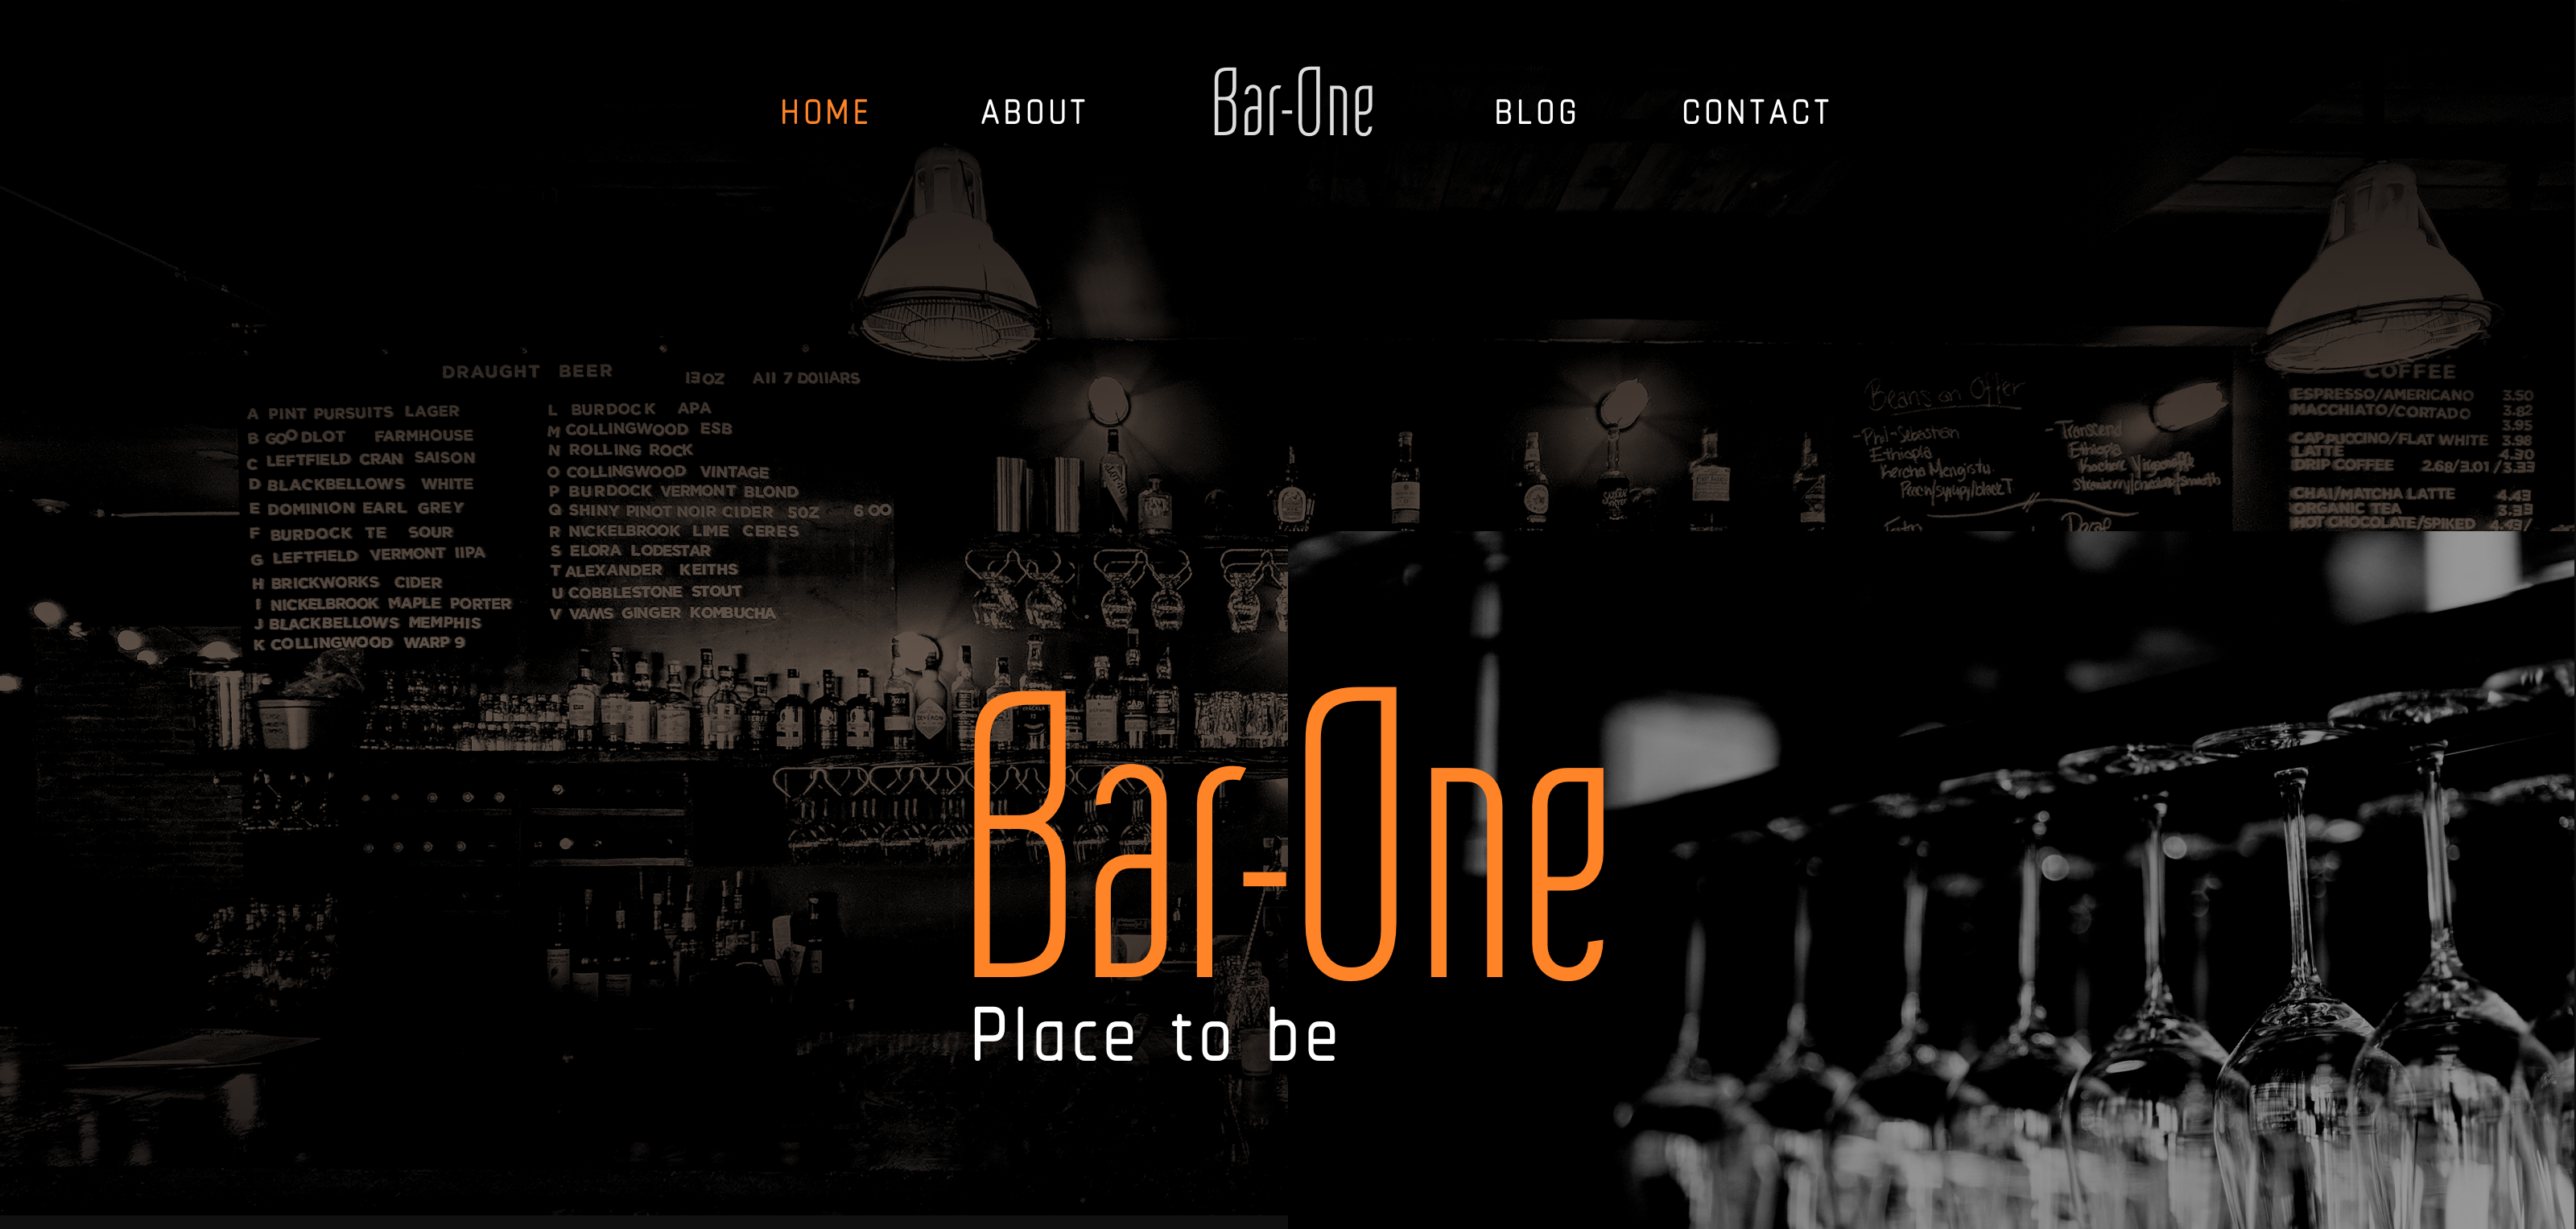 The header of a website with a background that is a back and white picture of the inside of a bar, with an orange title on the center saying 'Bar-One, Place to be' and a menu on the top.